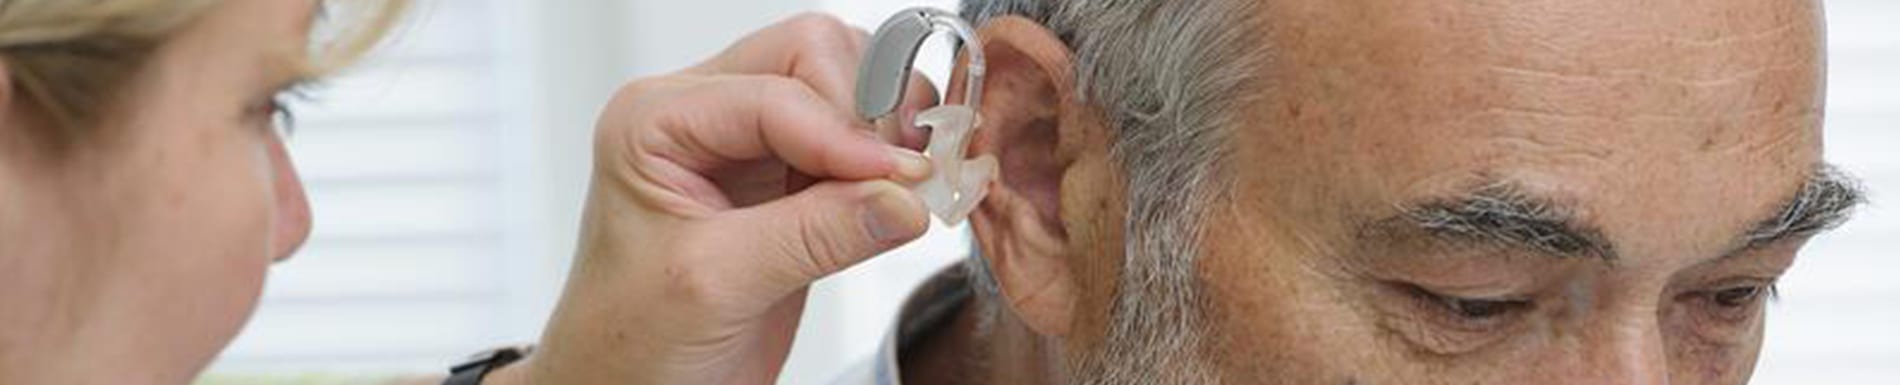 Otosclerosis Diagnosis And Treatment Hearing Specialists